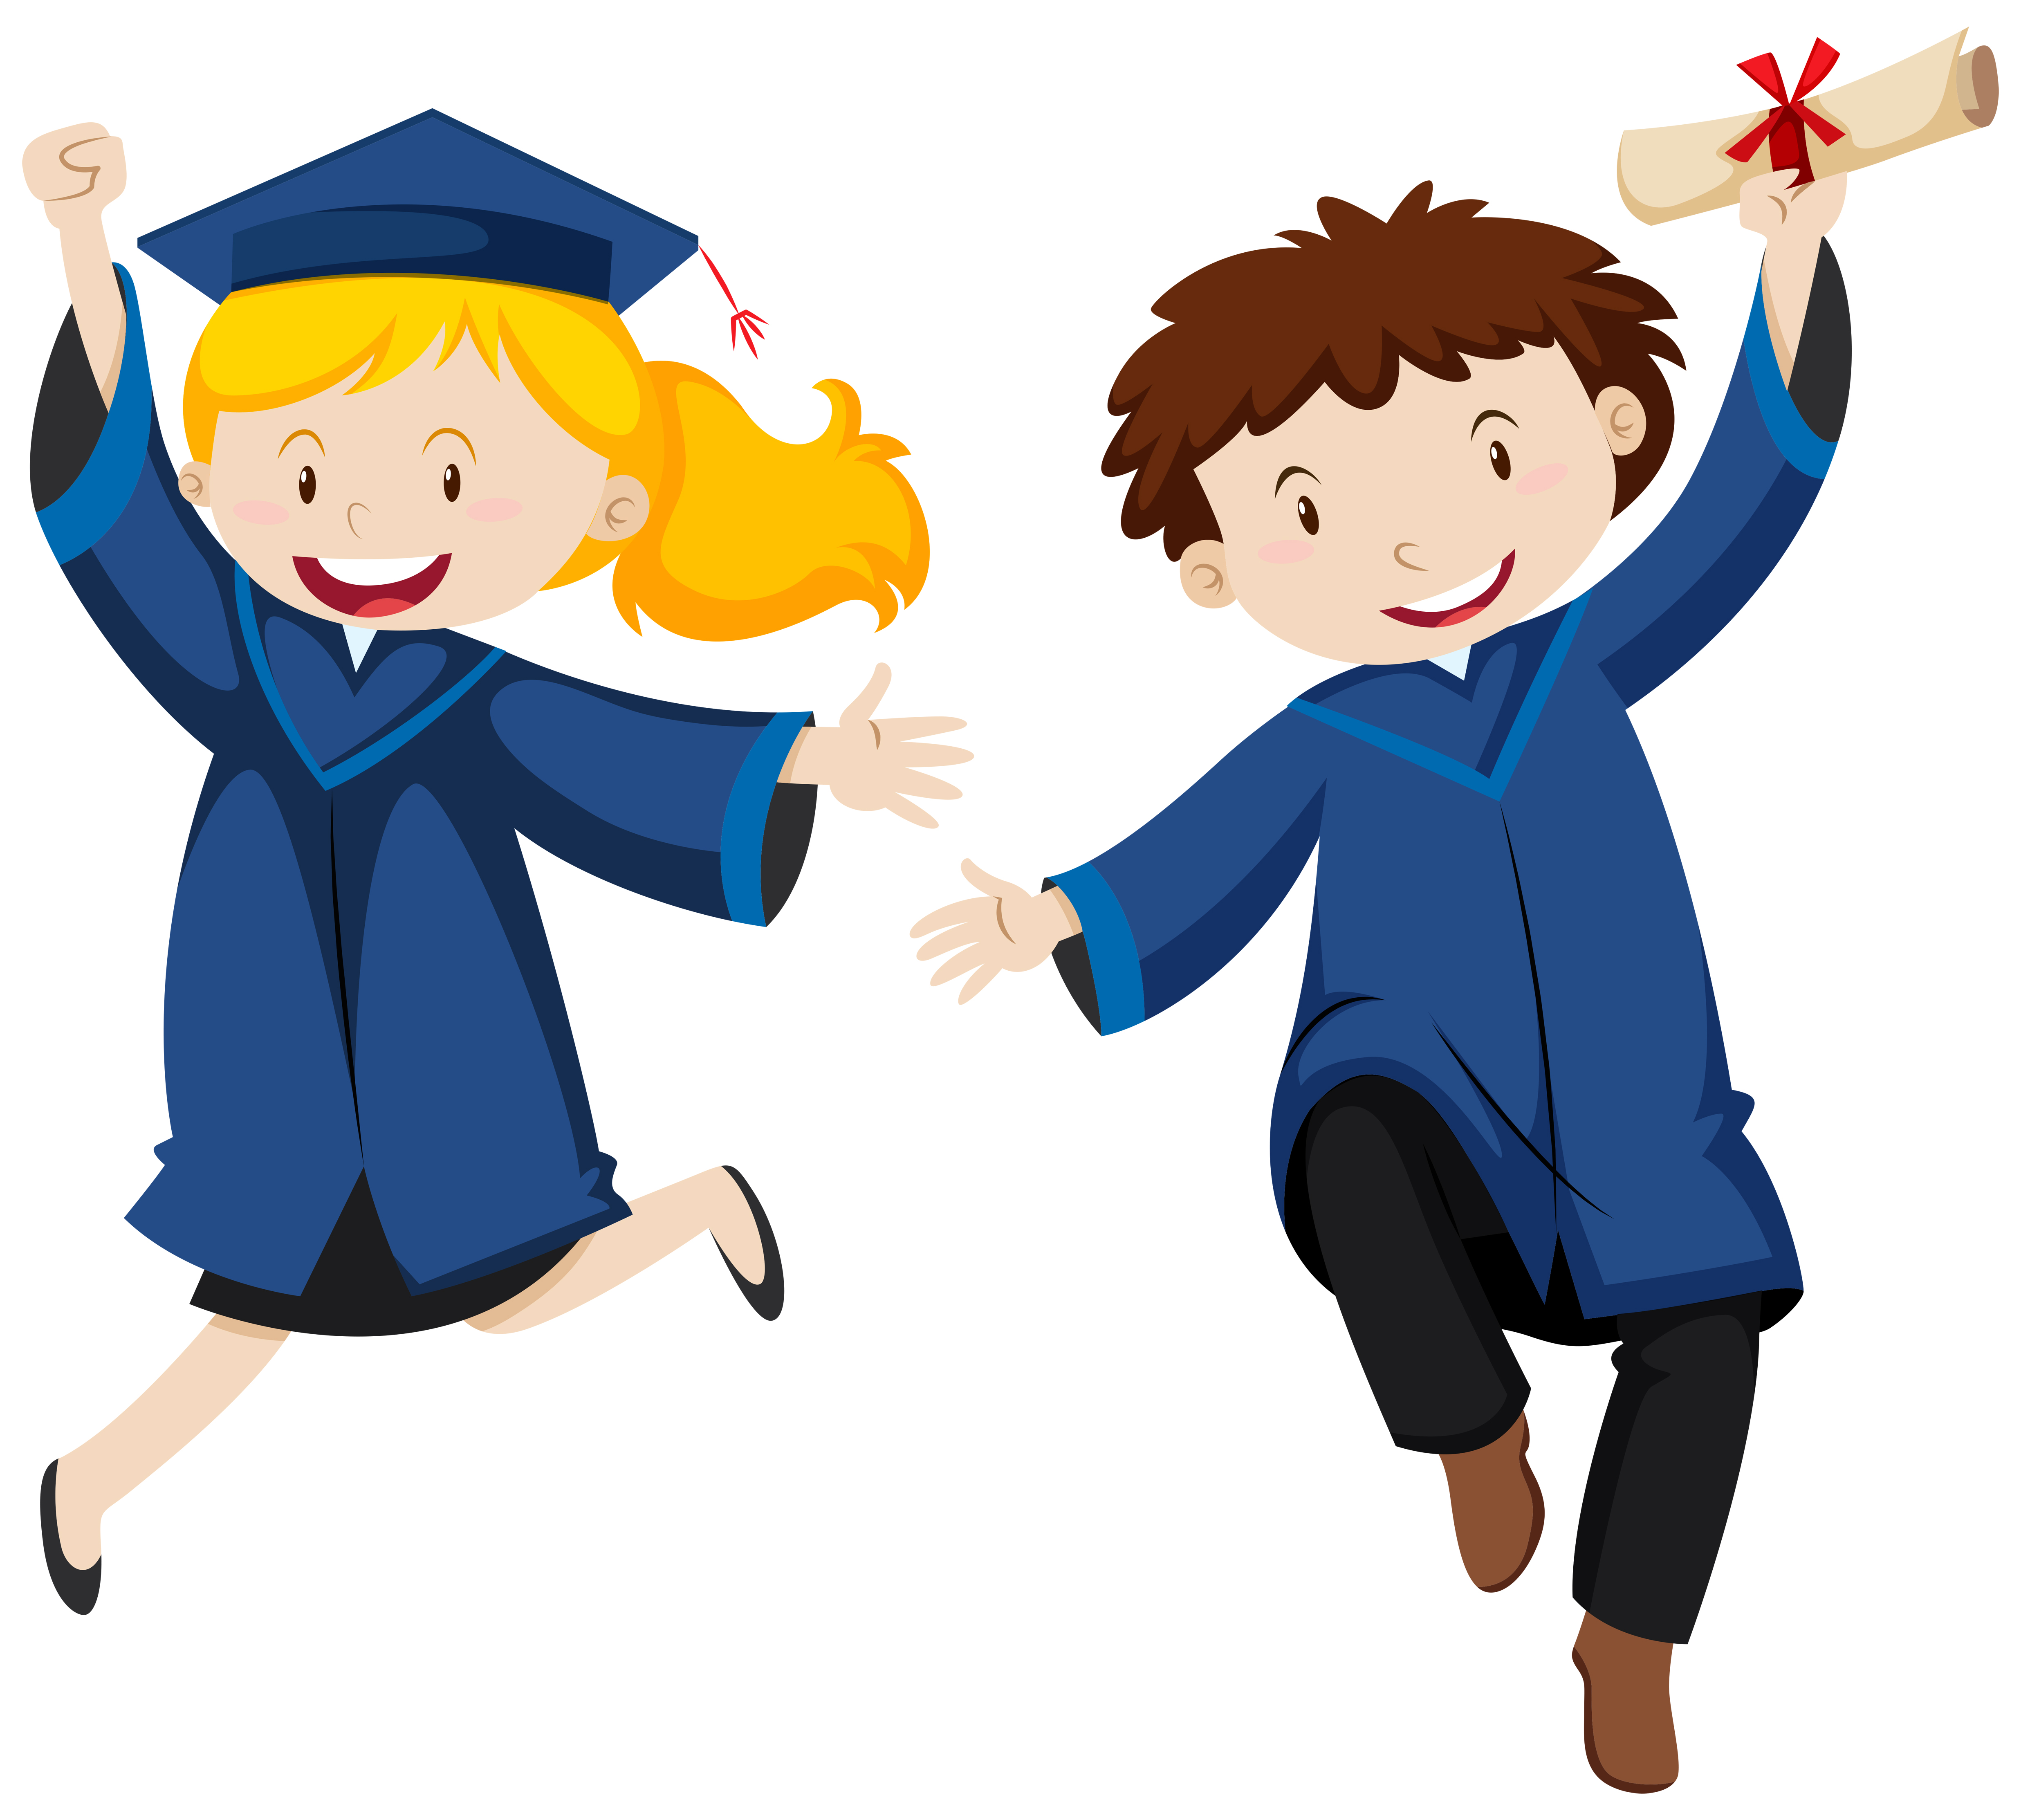 Graduation ceremony with two students 591557 - Download Free Vectors